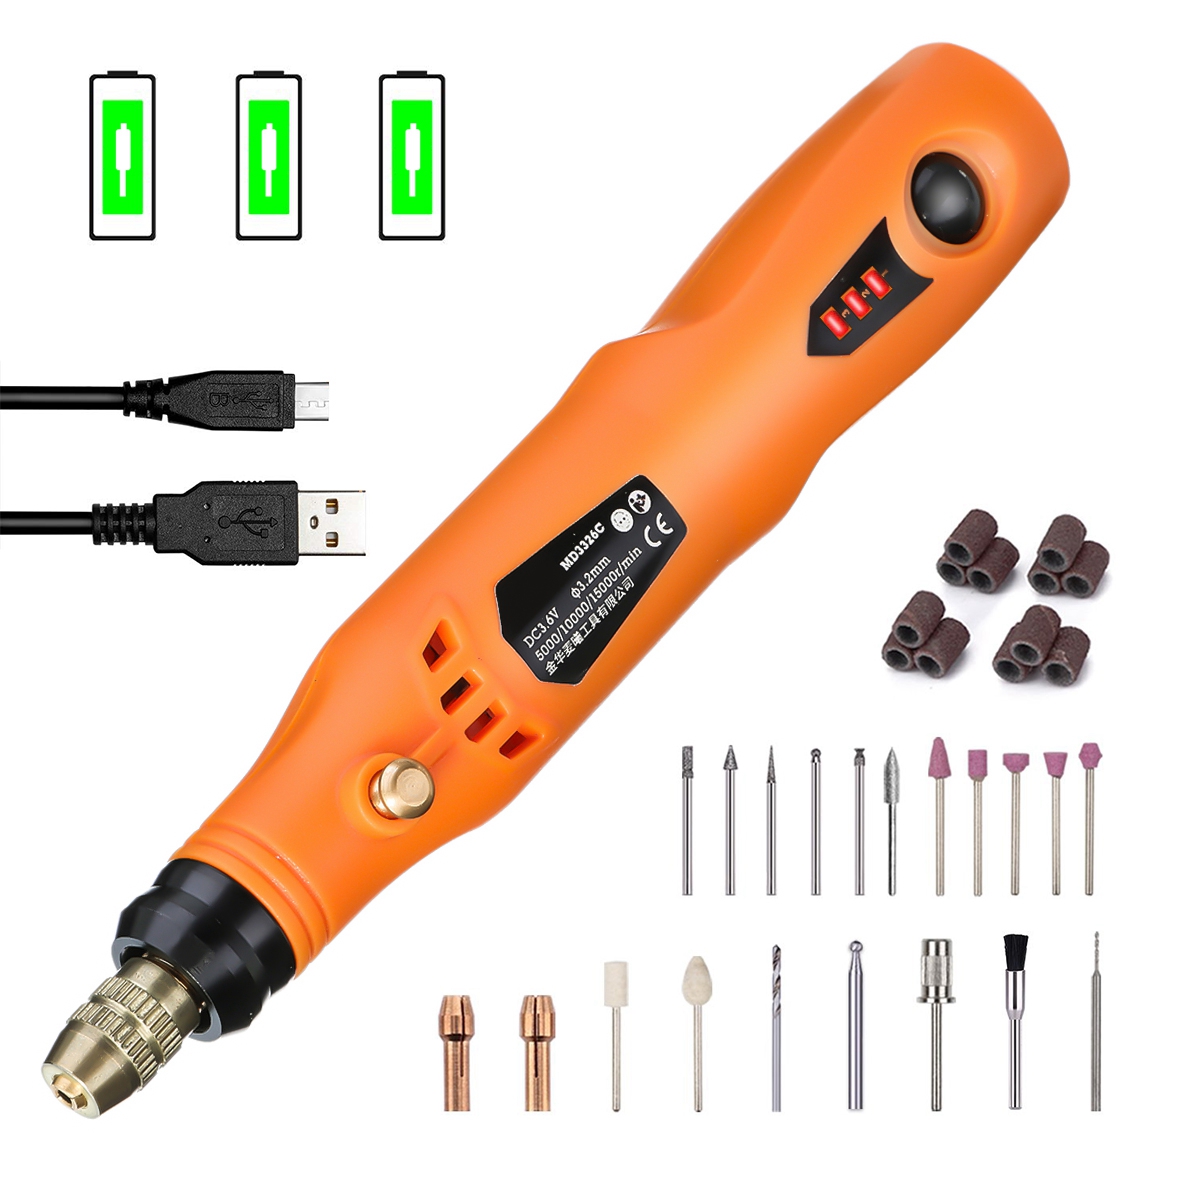 

Mini USB Power Drills Electric Grinder Multipurposed Rotary Tool 3 Variable Speeds 34Pcs Accessory for Polishing Cleaning Engraving Carving Drilling